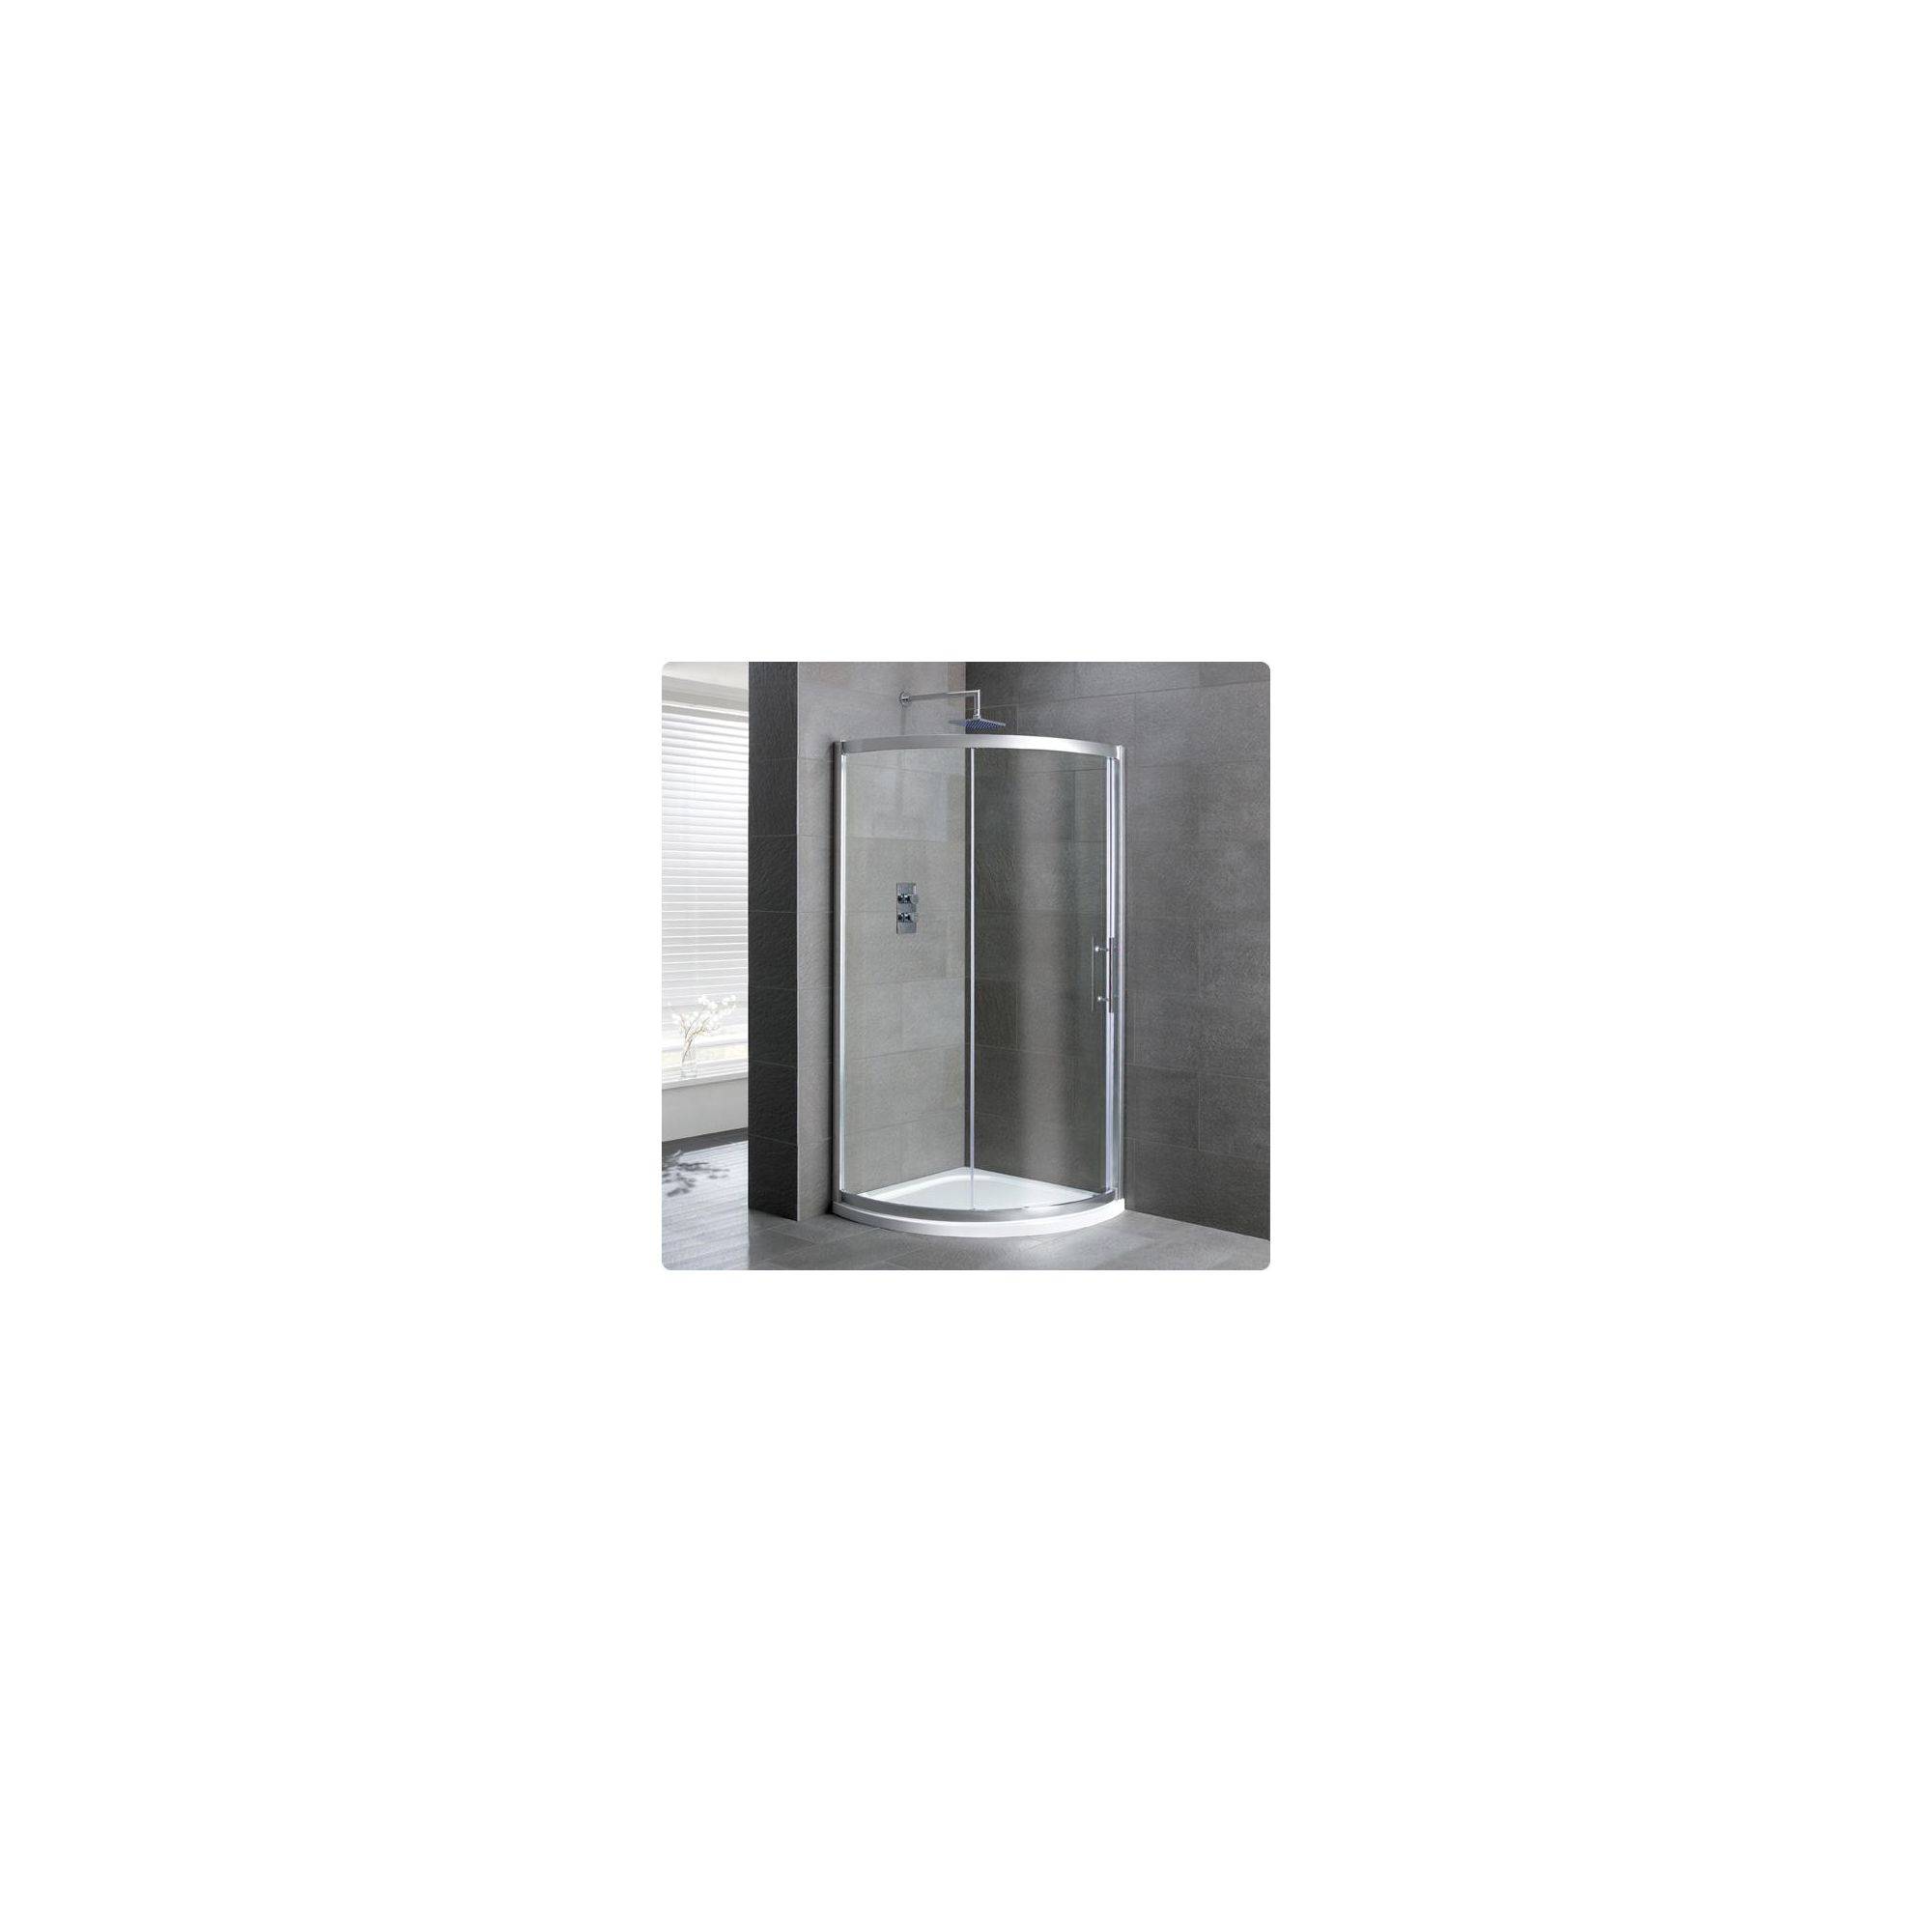 Duchy Select Silver 2 Door Quadrant Shower Enclosure 900mm, Standard Tray, 6mm Glass at Tesco Direct